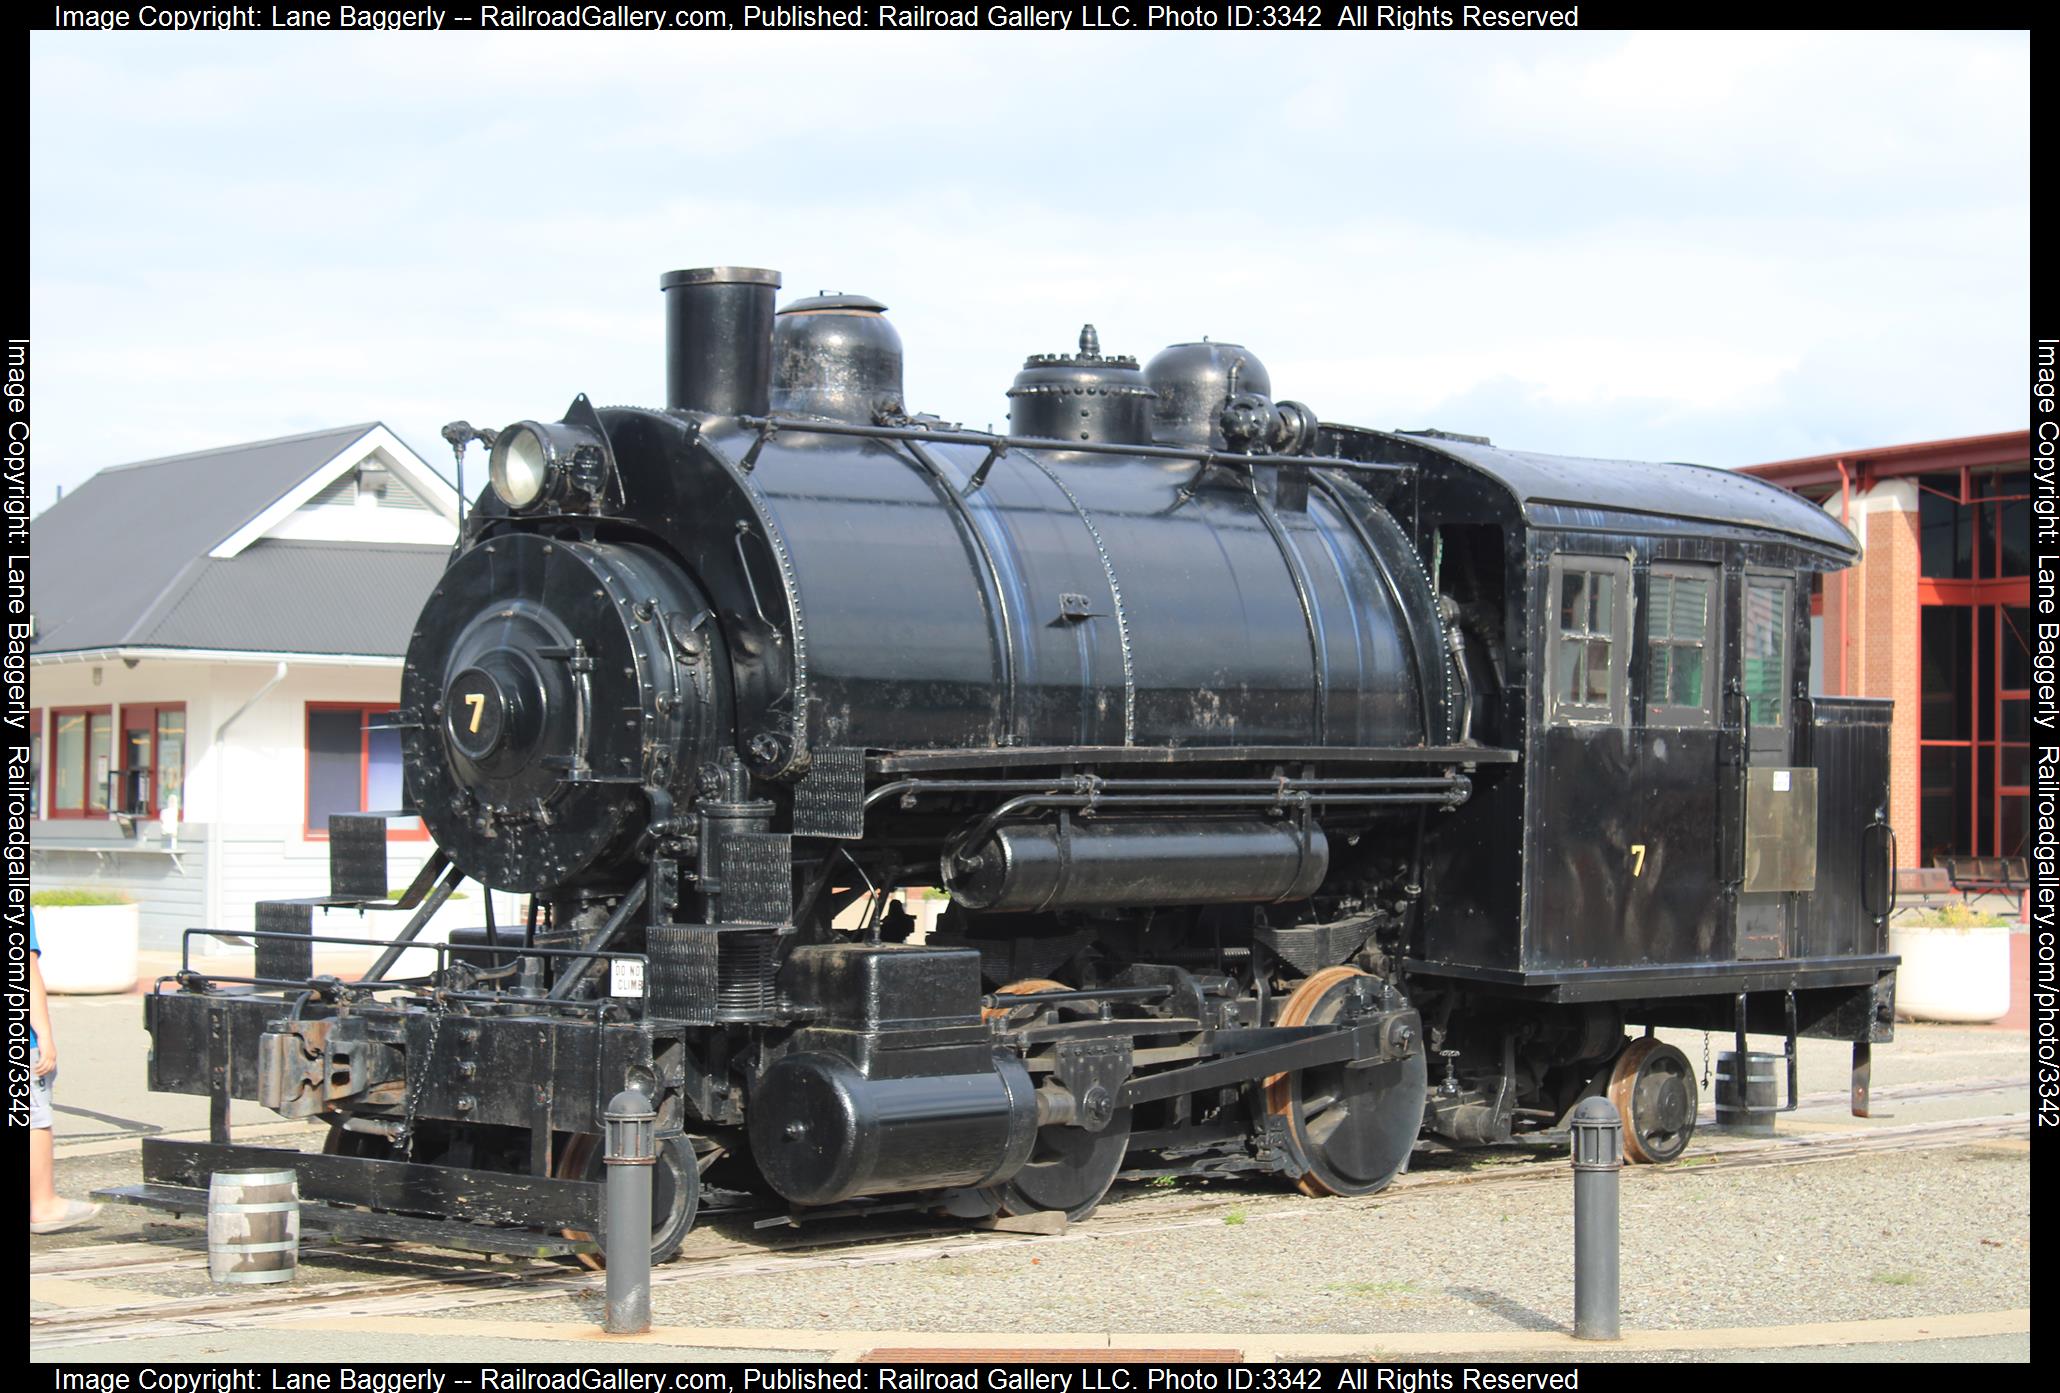 BMR 7 is a class 2-4-2 and  is pictured in Scranton, Pennsylvania, United States.  This was taken along the Steamtown on the Steamtown. Photo Copyright: Lane Baggerly uploaded to Railroad Gallery on 04/30/2024. This photograph of BMR 7 was taken on Thursday, September 16, 2021. All Rights Reserved. 